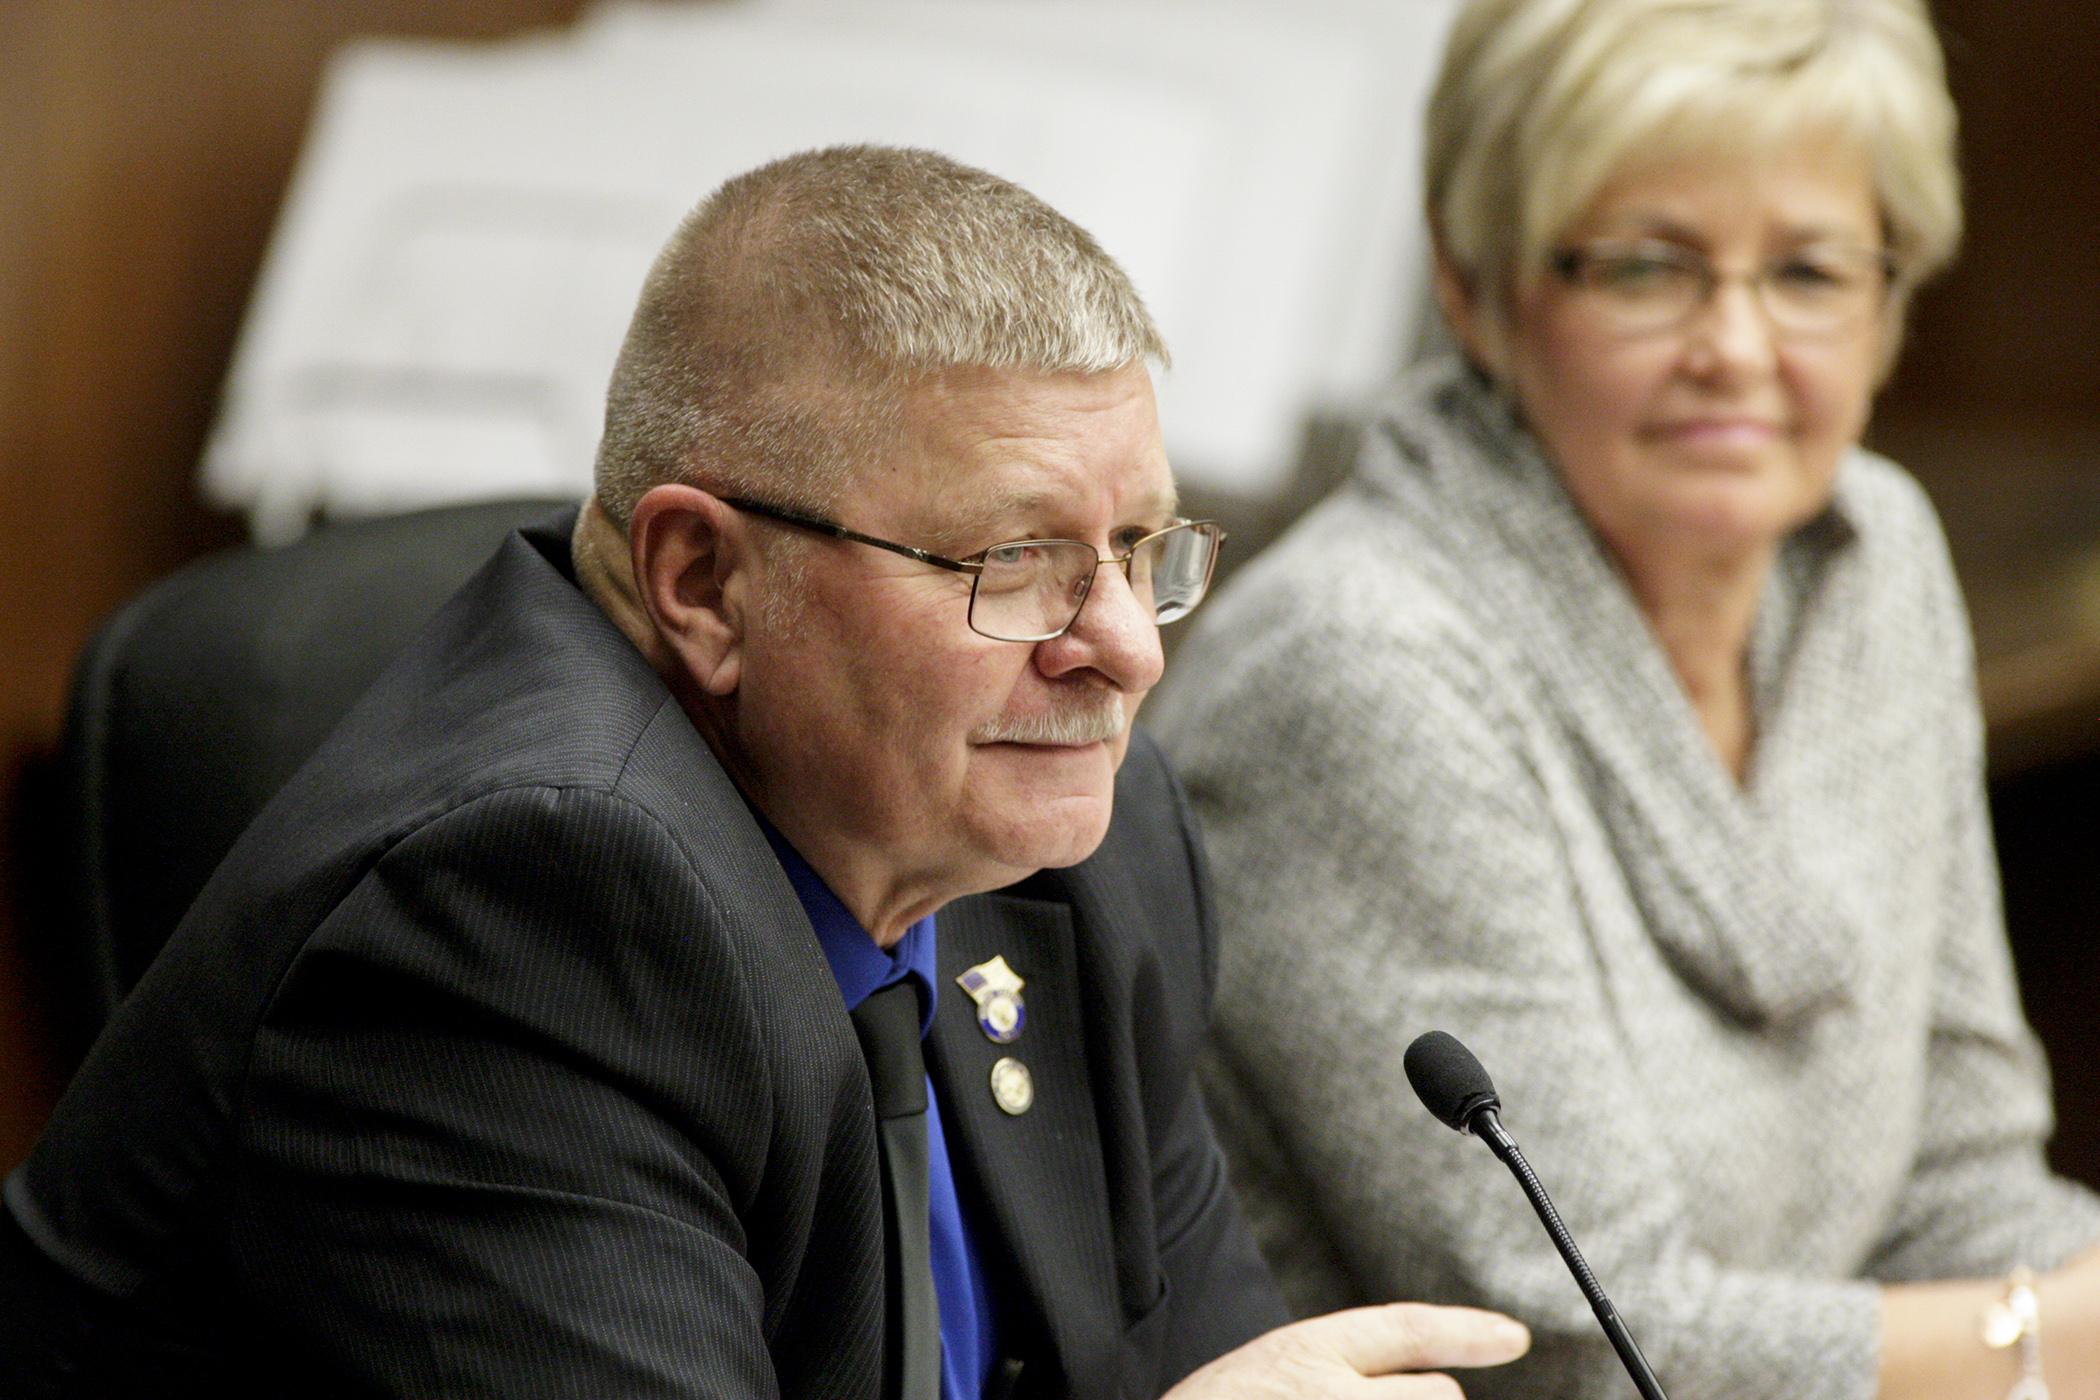 Rep. Dale Lueck offers a comment Jan. 18 to the House Taxes Committee about a bill he sponsors, HF9, which would phase out the state tax on Social Security benefits. Rep. Kathy Lohmer, right, sponsors a similar bill, HF213. Photo by Paul Battaglia